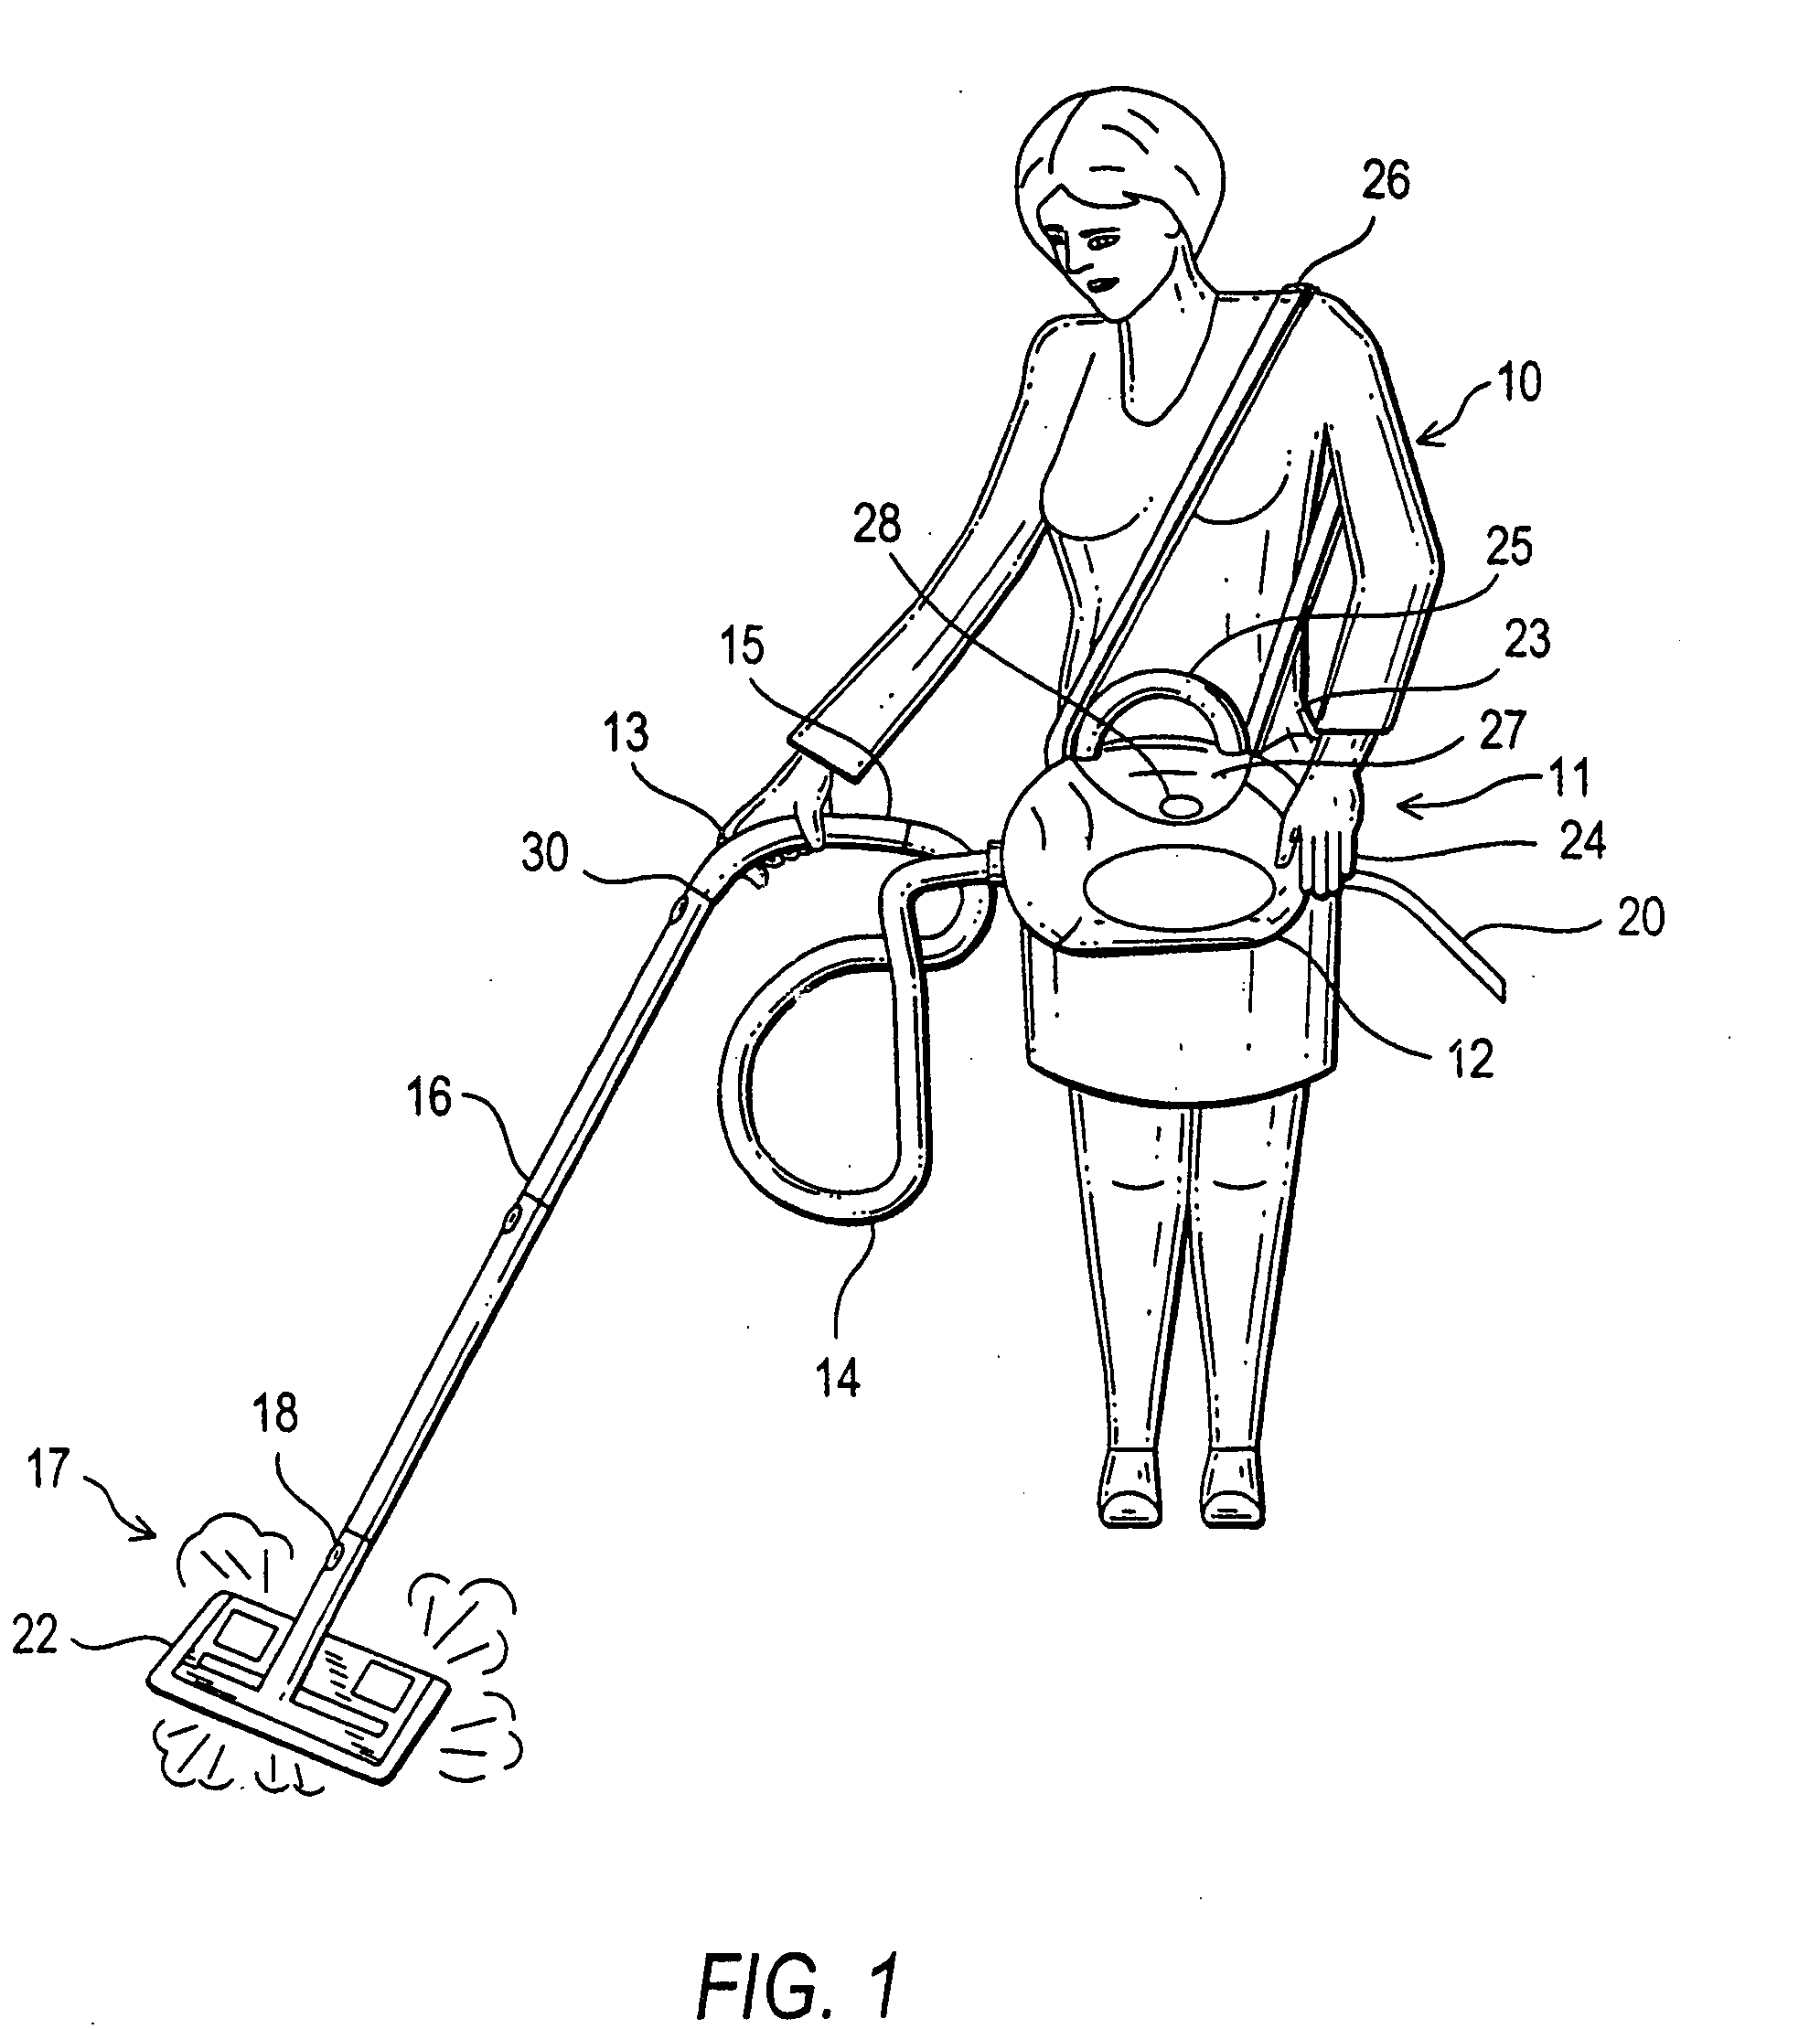 Steam nozzle attachment for use with steam cleaner